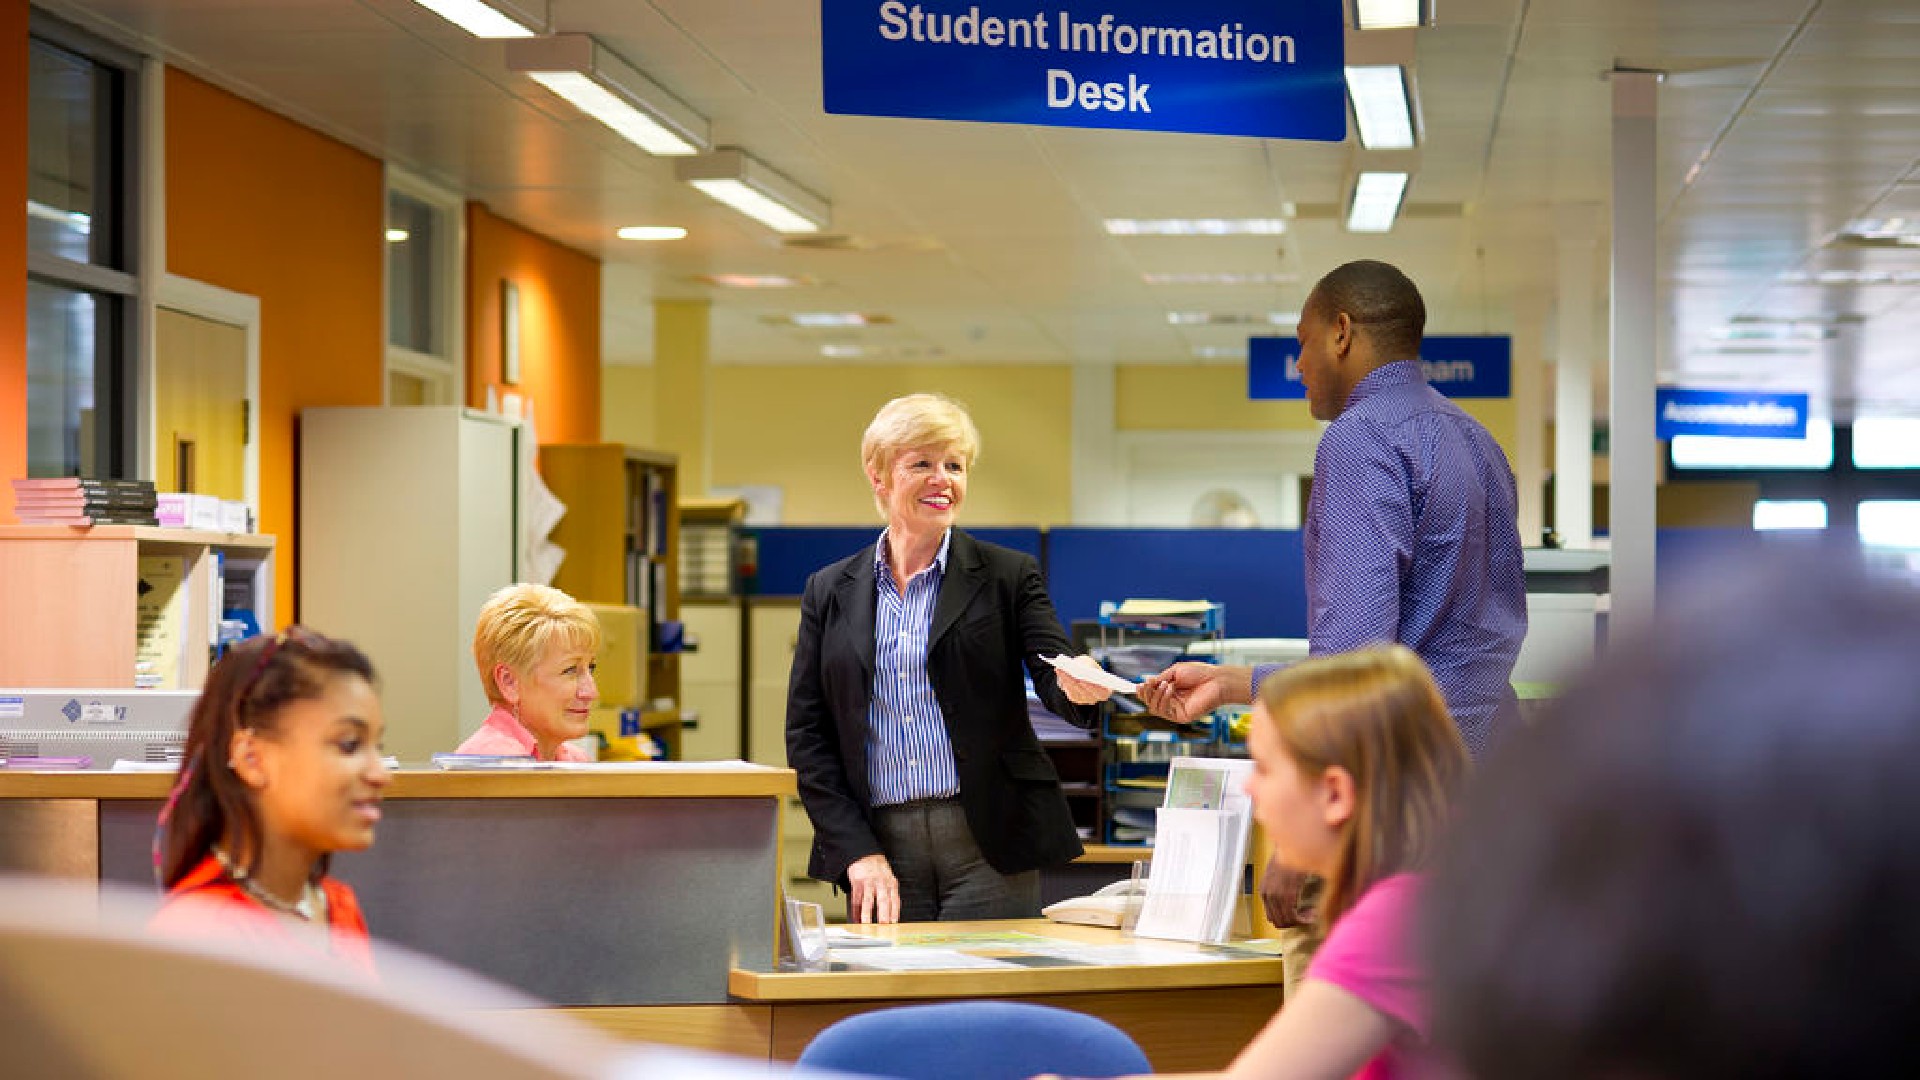 A group of people are stood near a desk that has the sign "Student Information Desk", in front of the desk two people are sat talking. 